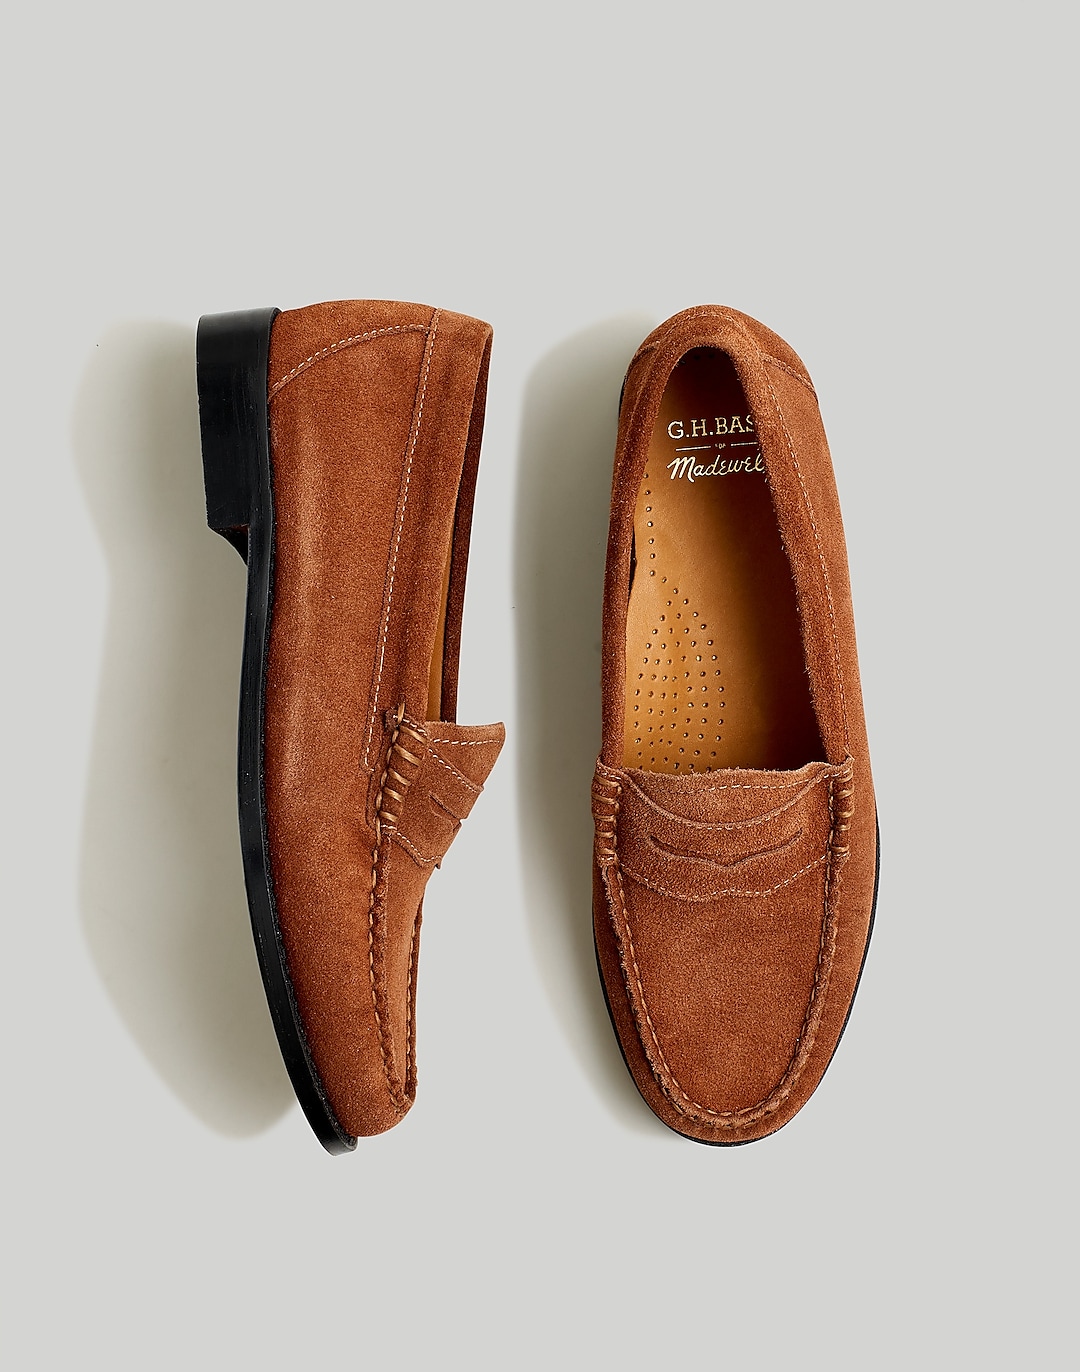 Madewell x G.H.BASS Whitney Weejuns® Penny Loafers | Madewell